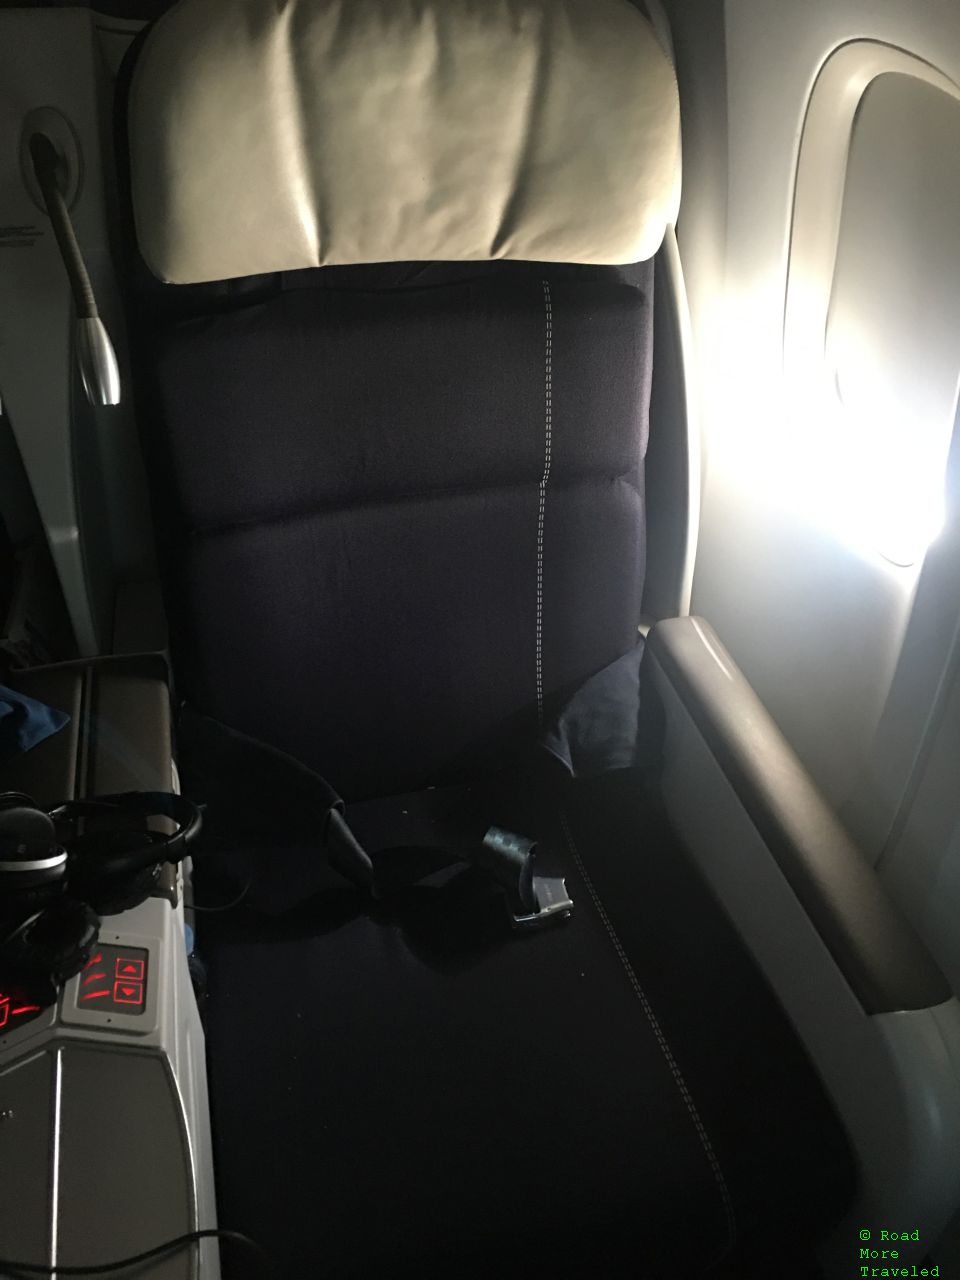 Air France angle-flat business class seat